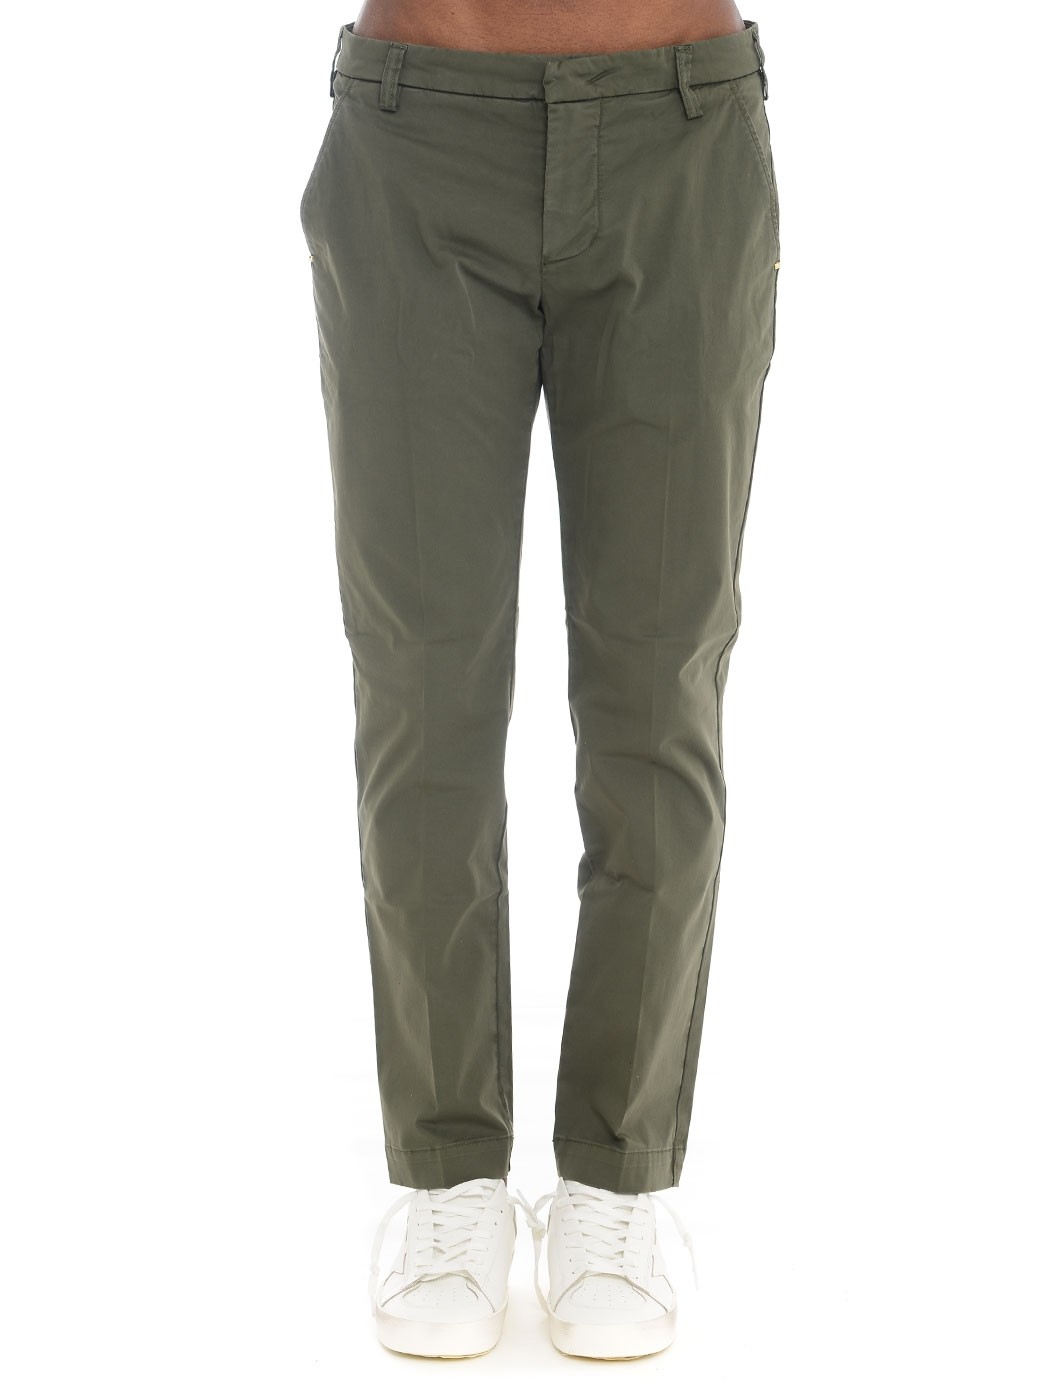  MAN TROUSERS,SPRING SUMMER TROUSERS,COTTON TROUSERS,SKIN FIT TROUSERS,INCOTEX TROUSERS,JACOB COHEN TROUSERS,NEIL BARRETT TROUSERS,MSGM TROUSERS  ENTRE AMIS 238L17